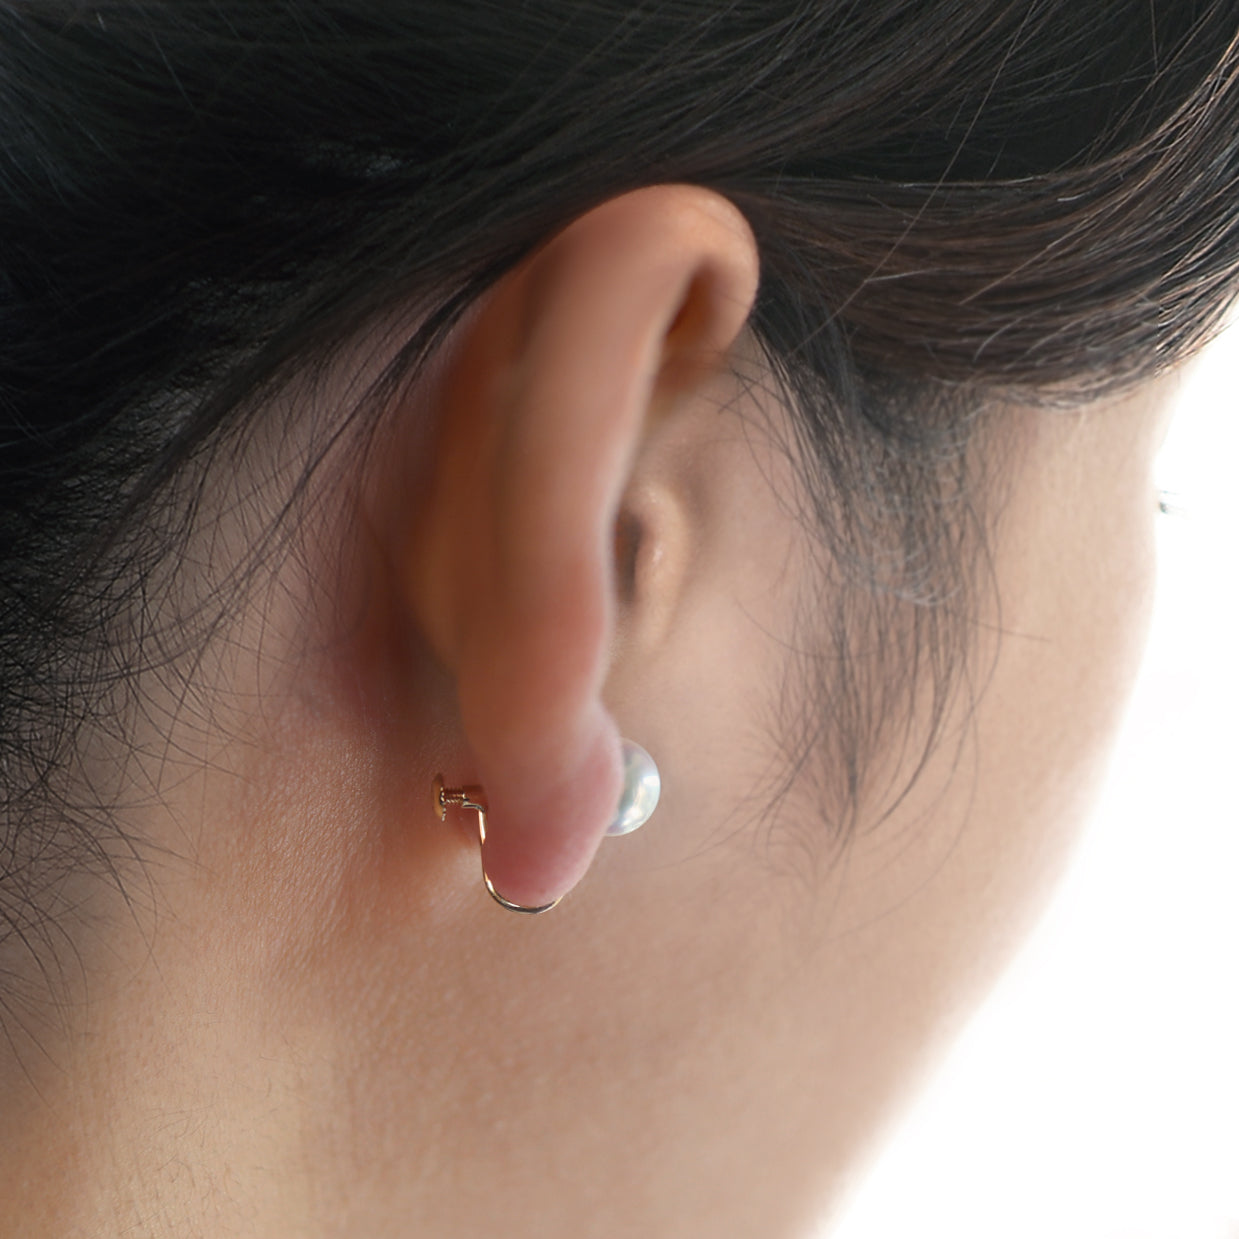 【BASE PARTS】18K YG Stud Earring with Butterfly Backing